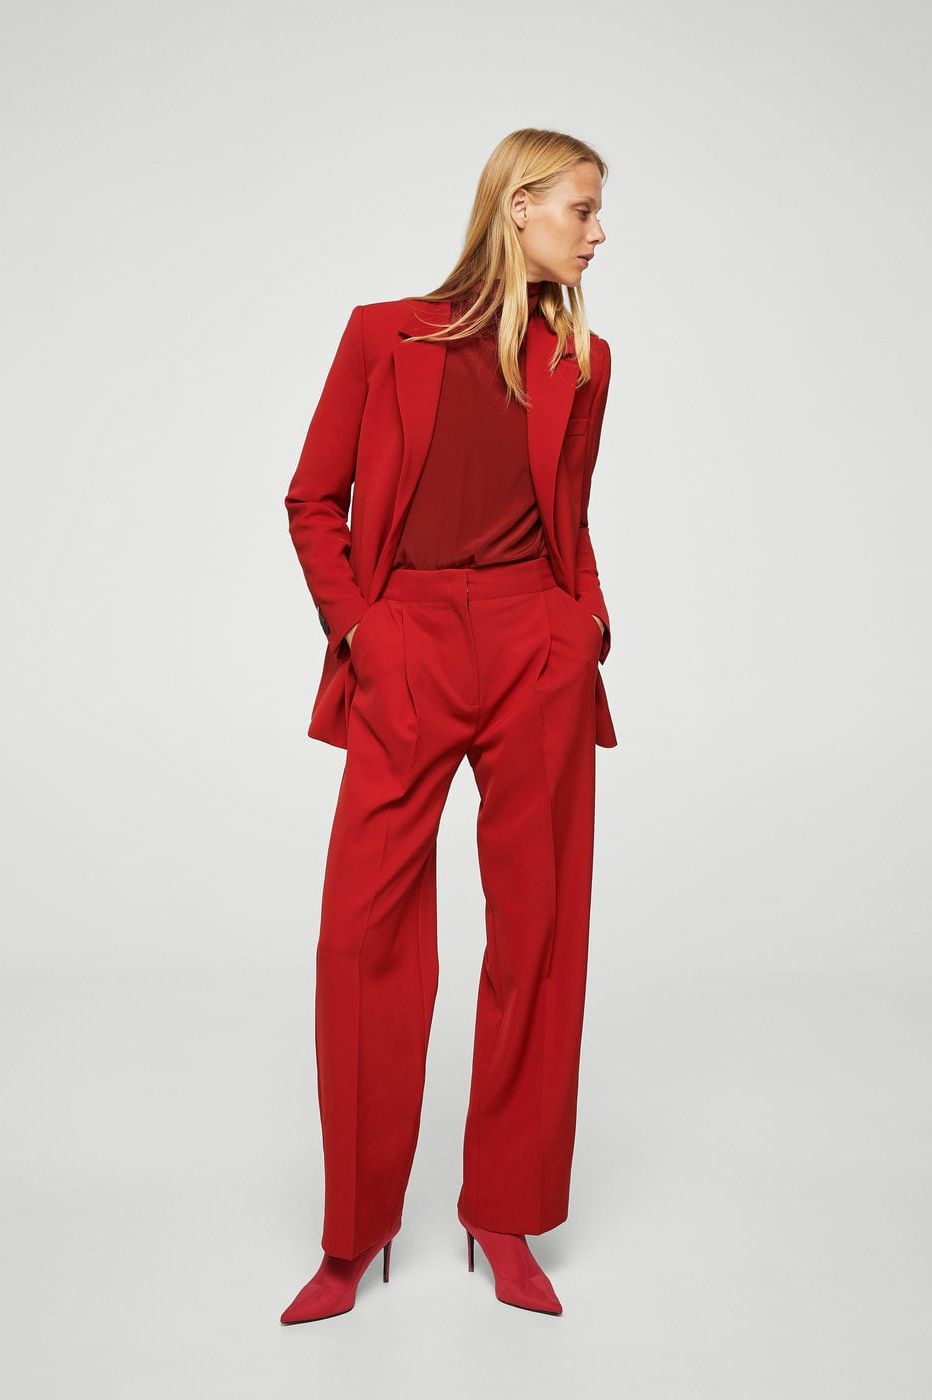 Clothing, Red, Standing, Fashion model, Suit, Pajamas, Pantsuit, Formal wear, Waist, Trousers, 